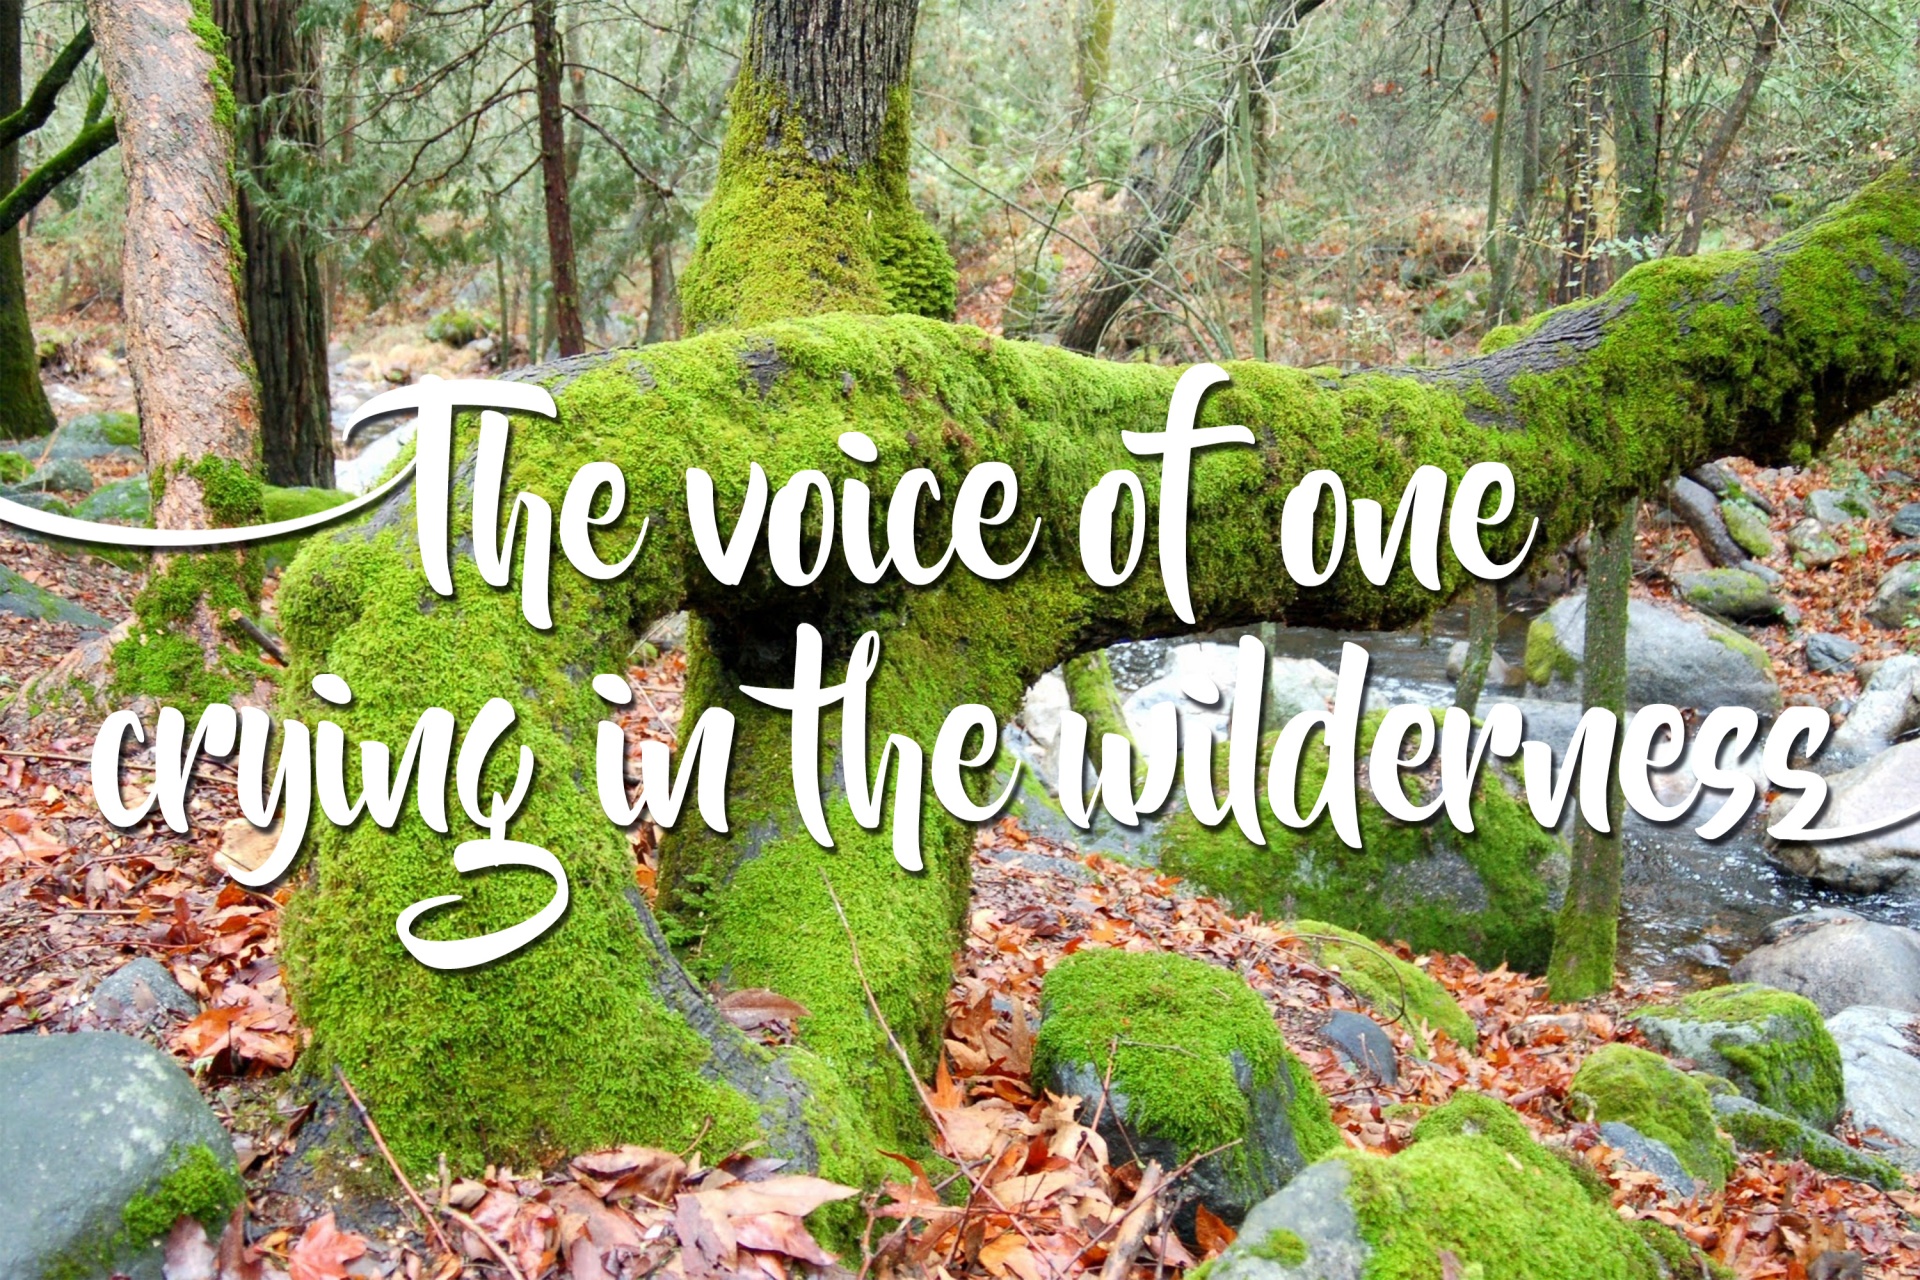 word artwork that says voice one crying wilderness free photo